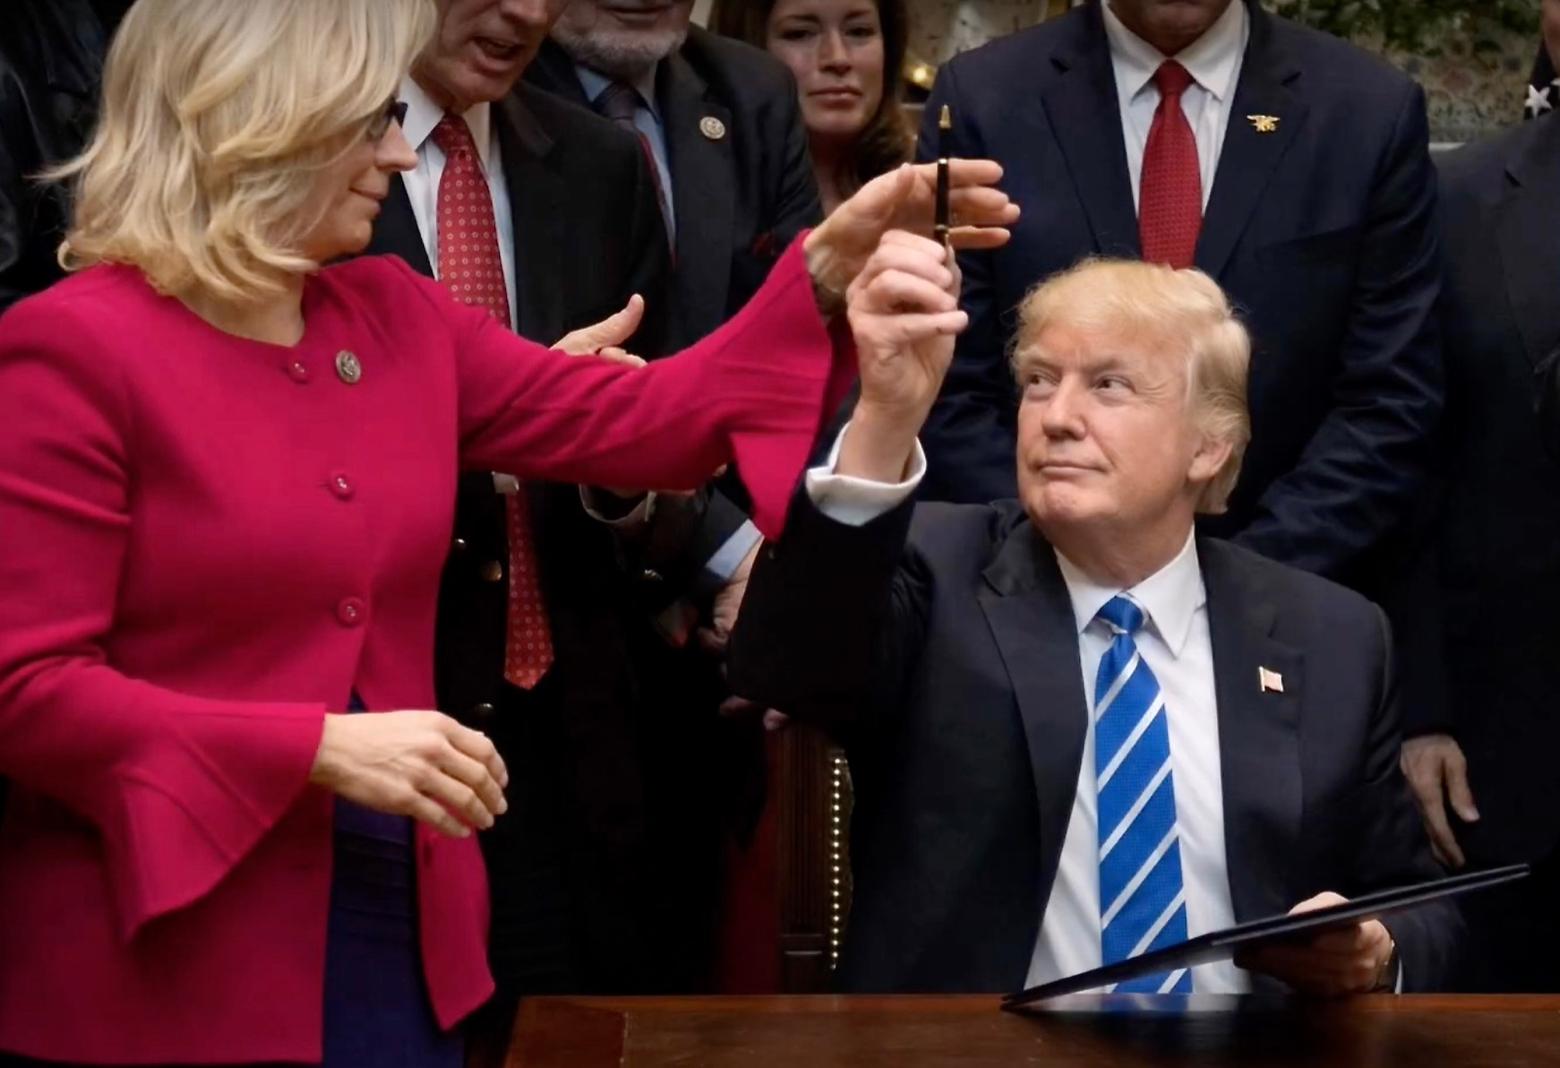 US Rep. Liz Cheney at an event with then-President Donald Trump in The White House in 2017 (photo whitehouse.gov/flckr)